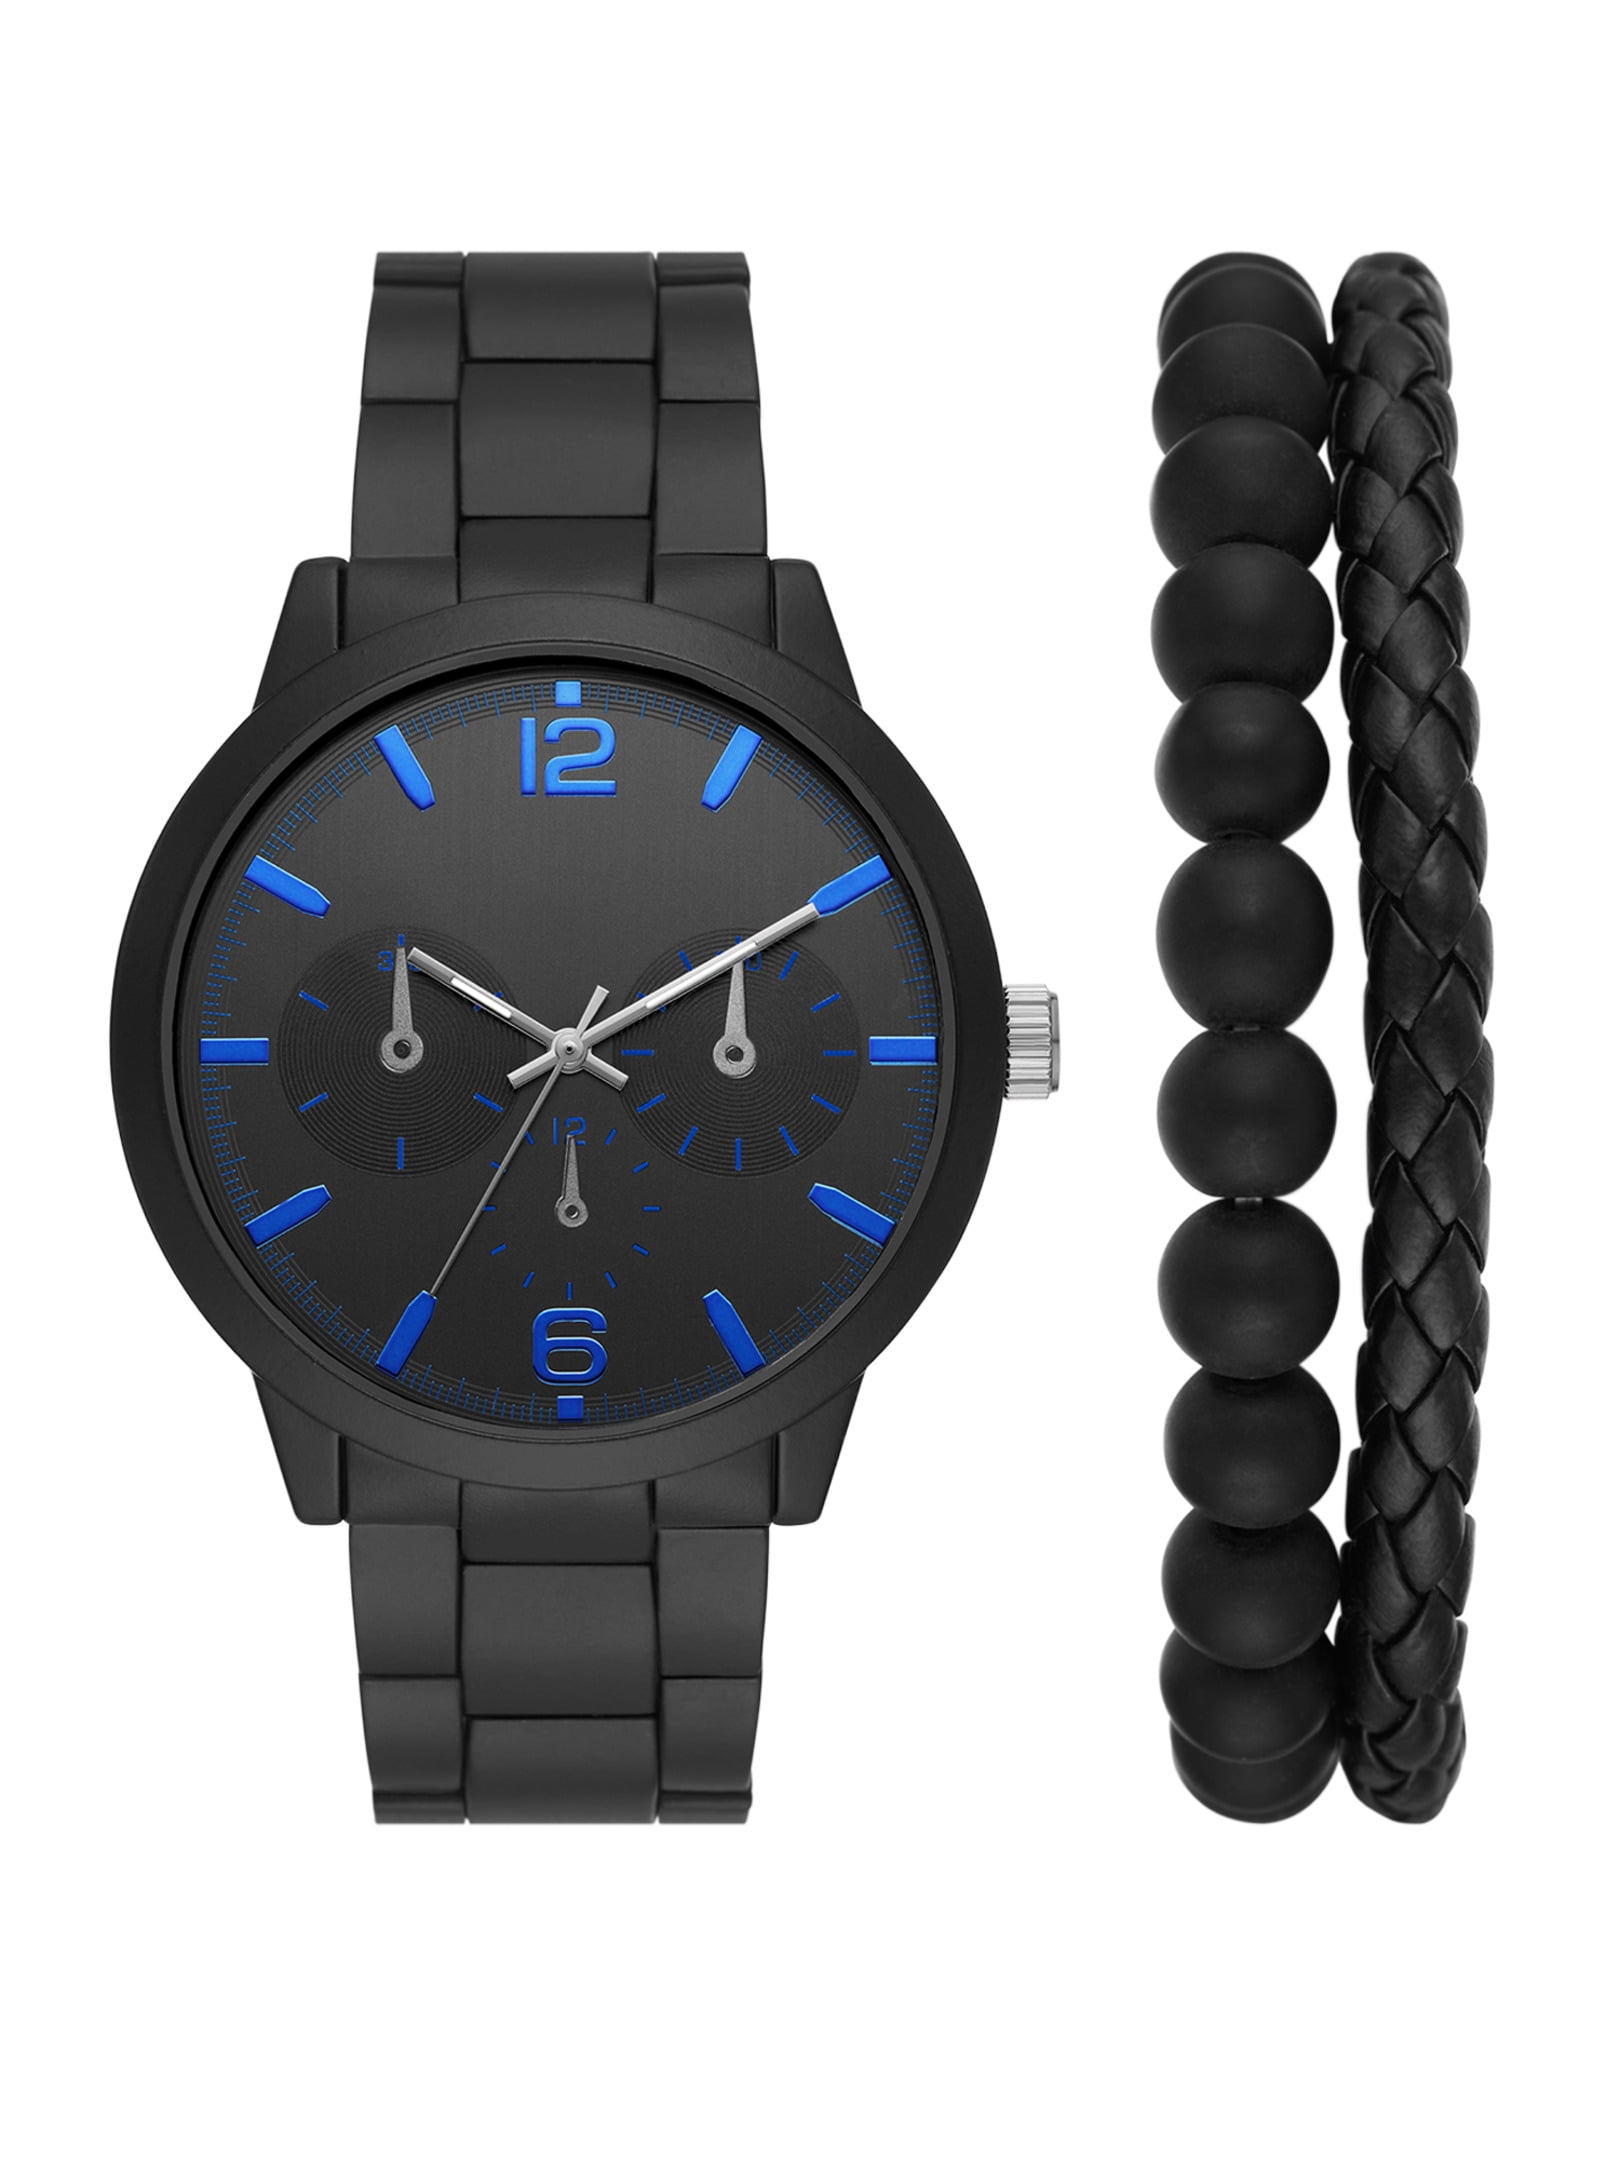 George Men's Watch Set with Black Round Case, Black Dial with Midnight Blue Markings and Hands and Black 3 Link Bracelet, Black Braided Vegan Leather Band and Black Stretchy Bead Bracelet